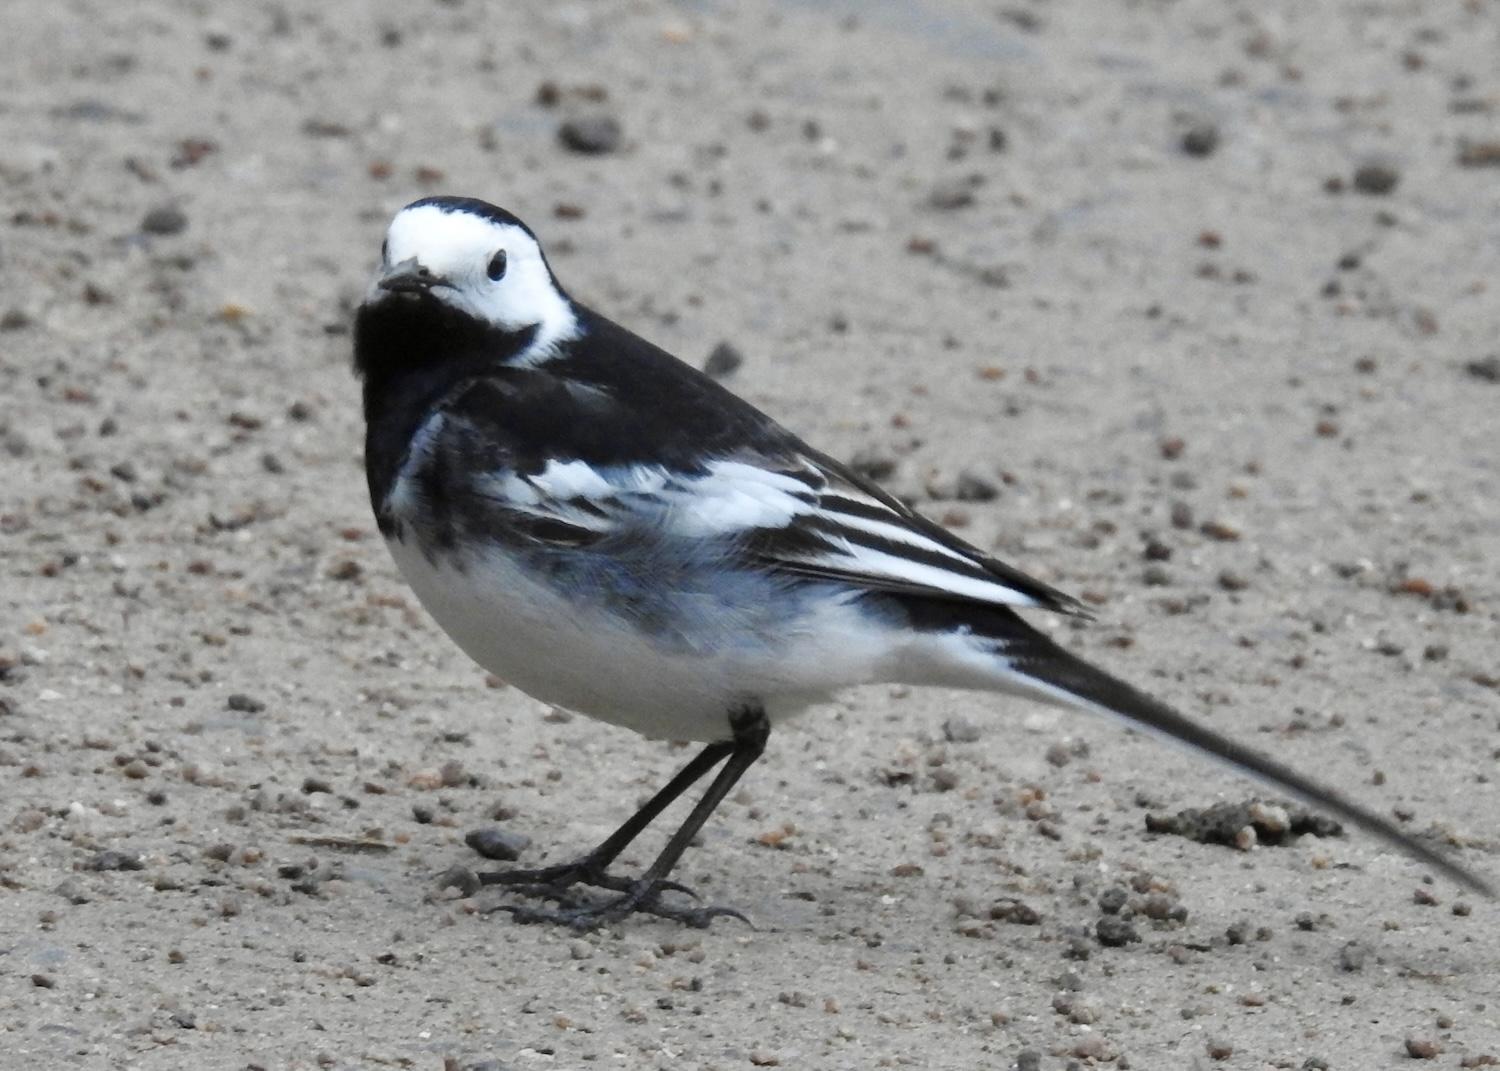 A cheerful Pied Wagtail looks for food in the Loch Morlich parking lot in Cairngorms National Park.